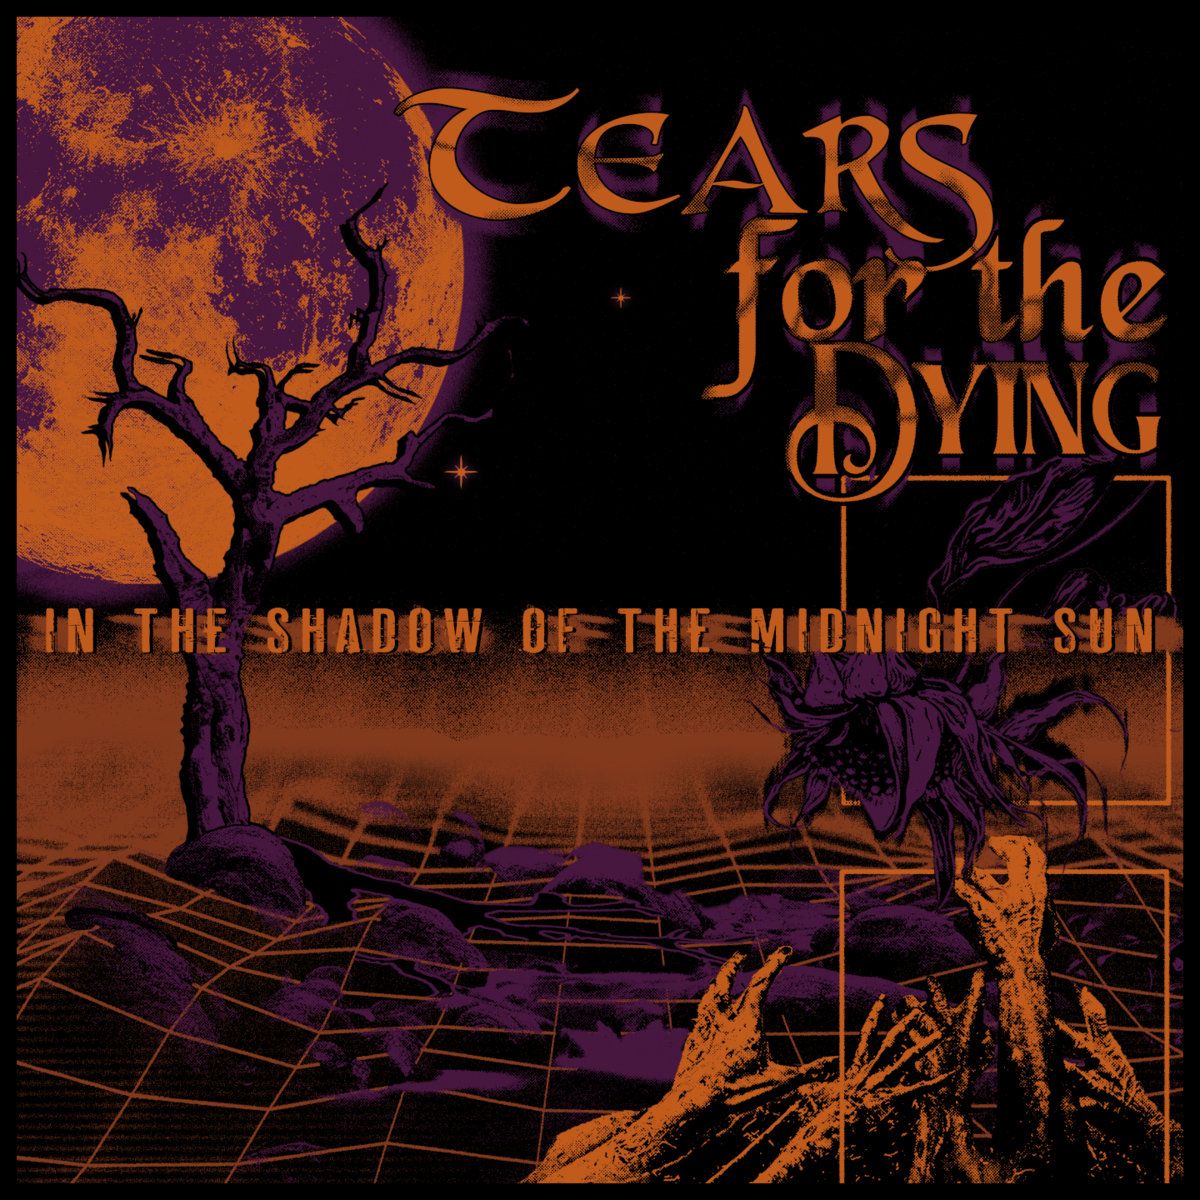 Through the Darkness of the Mind — Listen to Tears for the Dying’s “In the Shadow of the Midnight Sun”